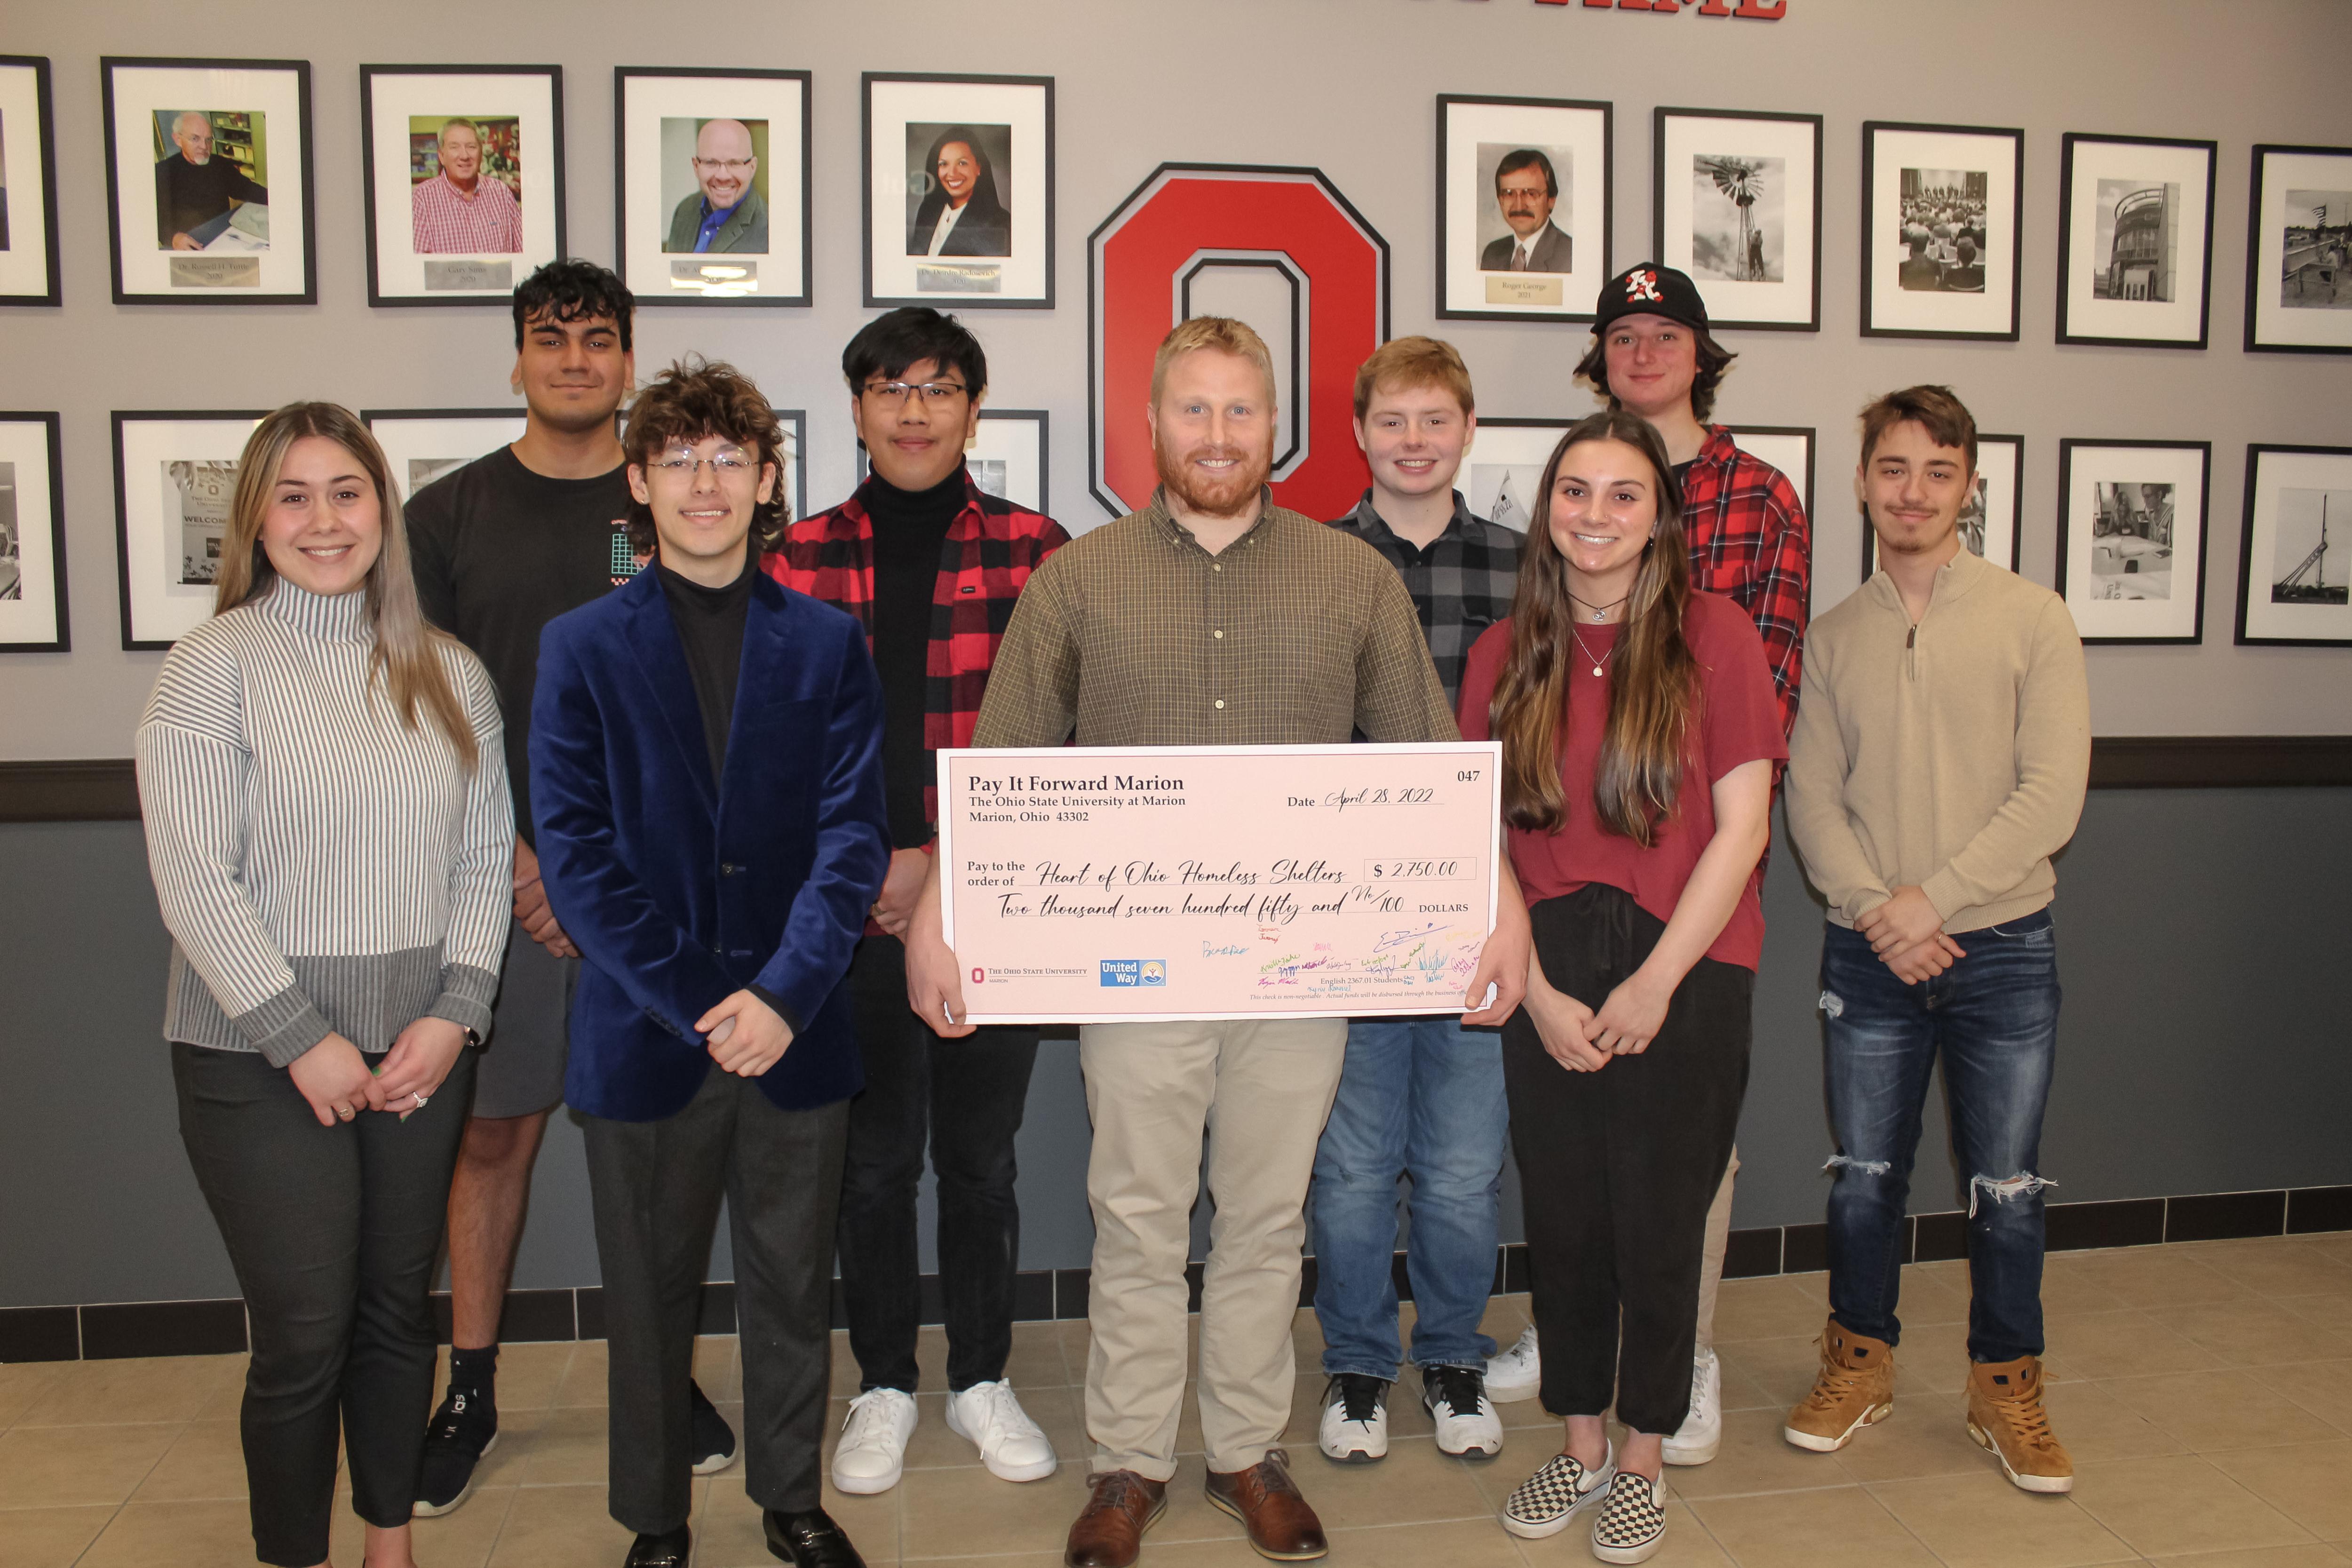 students posing with recipient of one of the checks